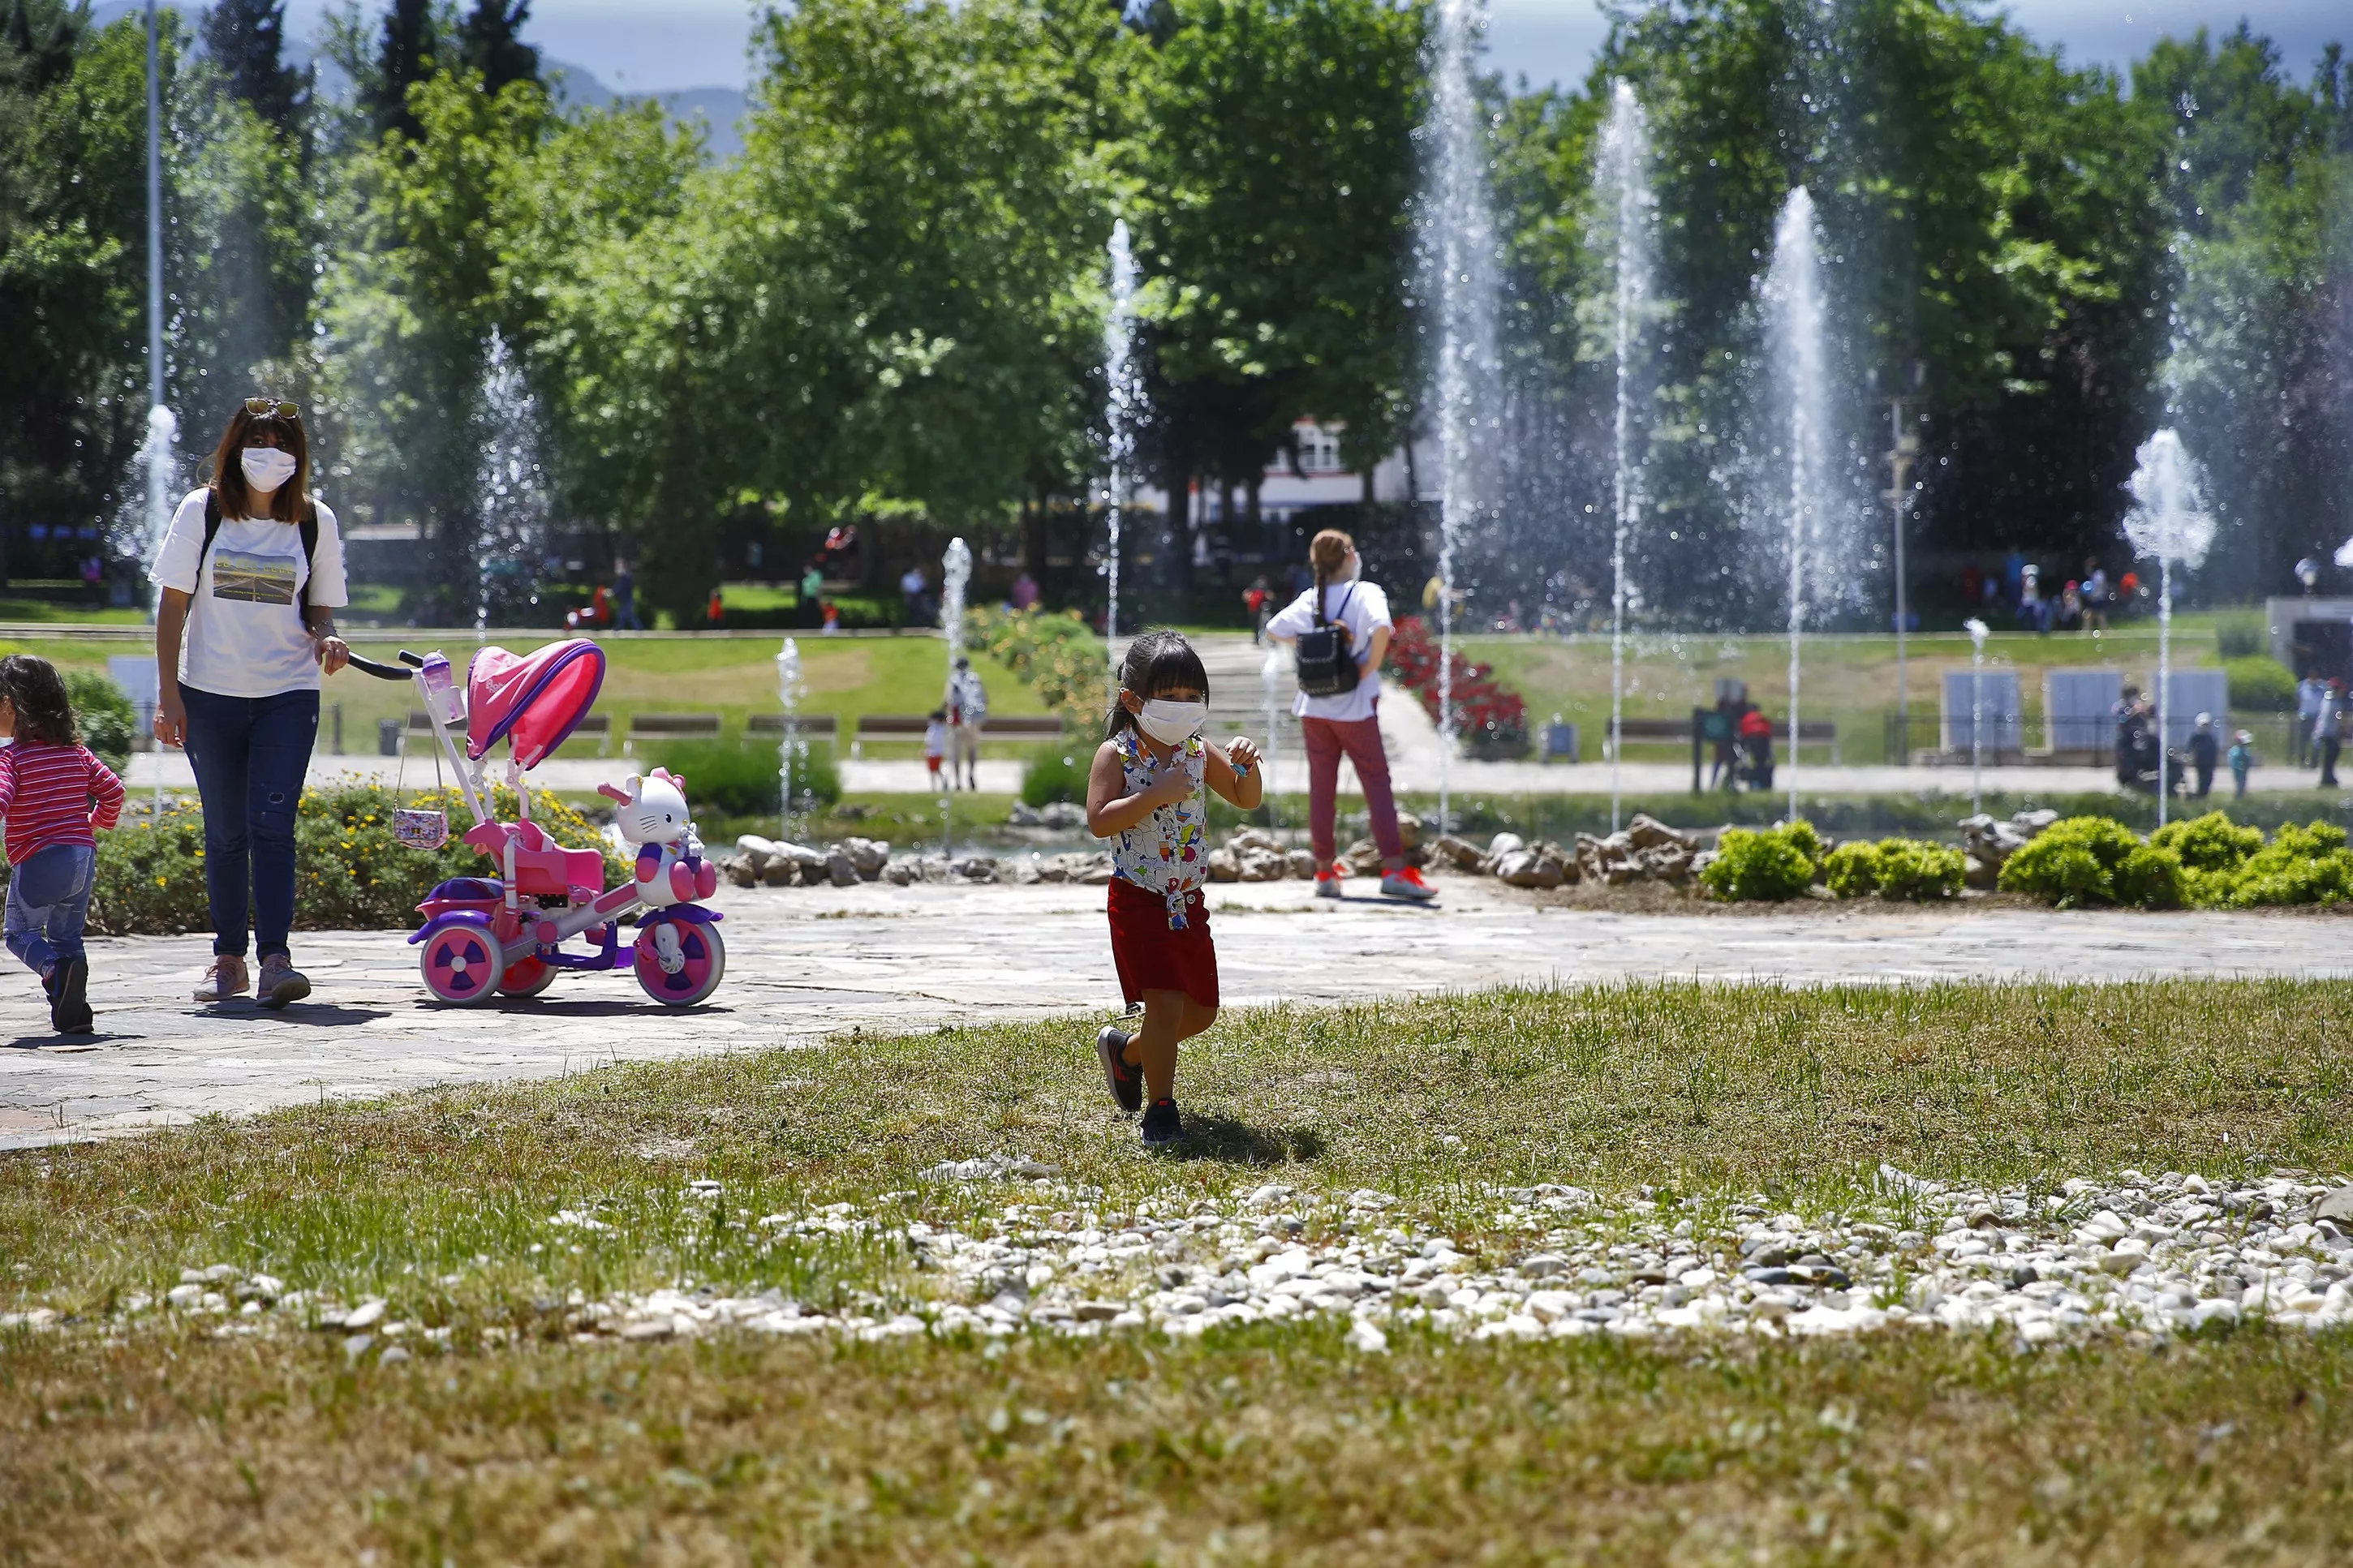 Justice Park in Turkey, Central Asia | Parks - Rated 3.6